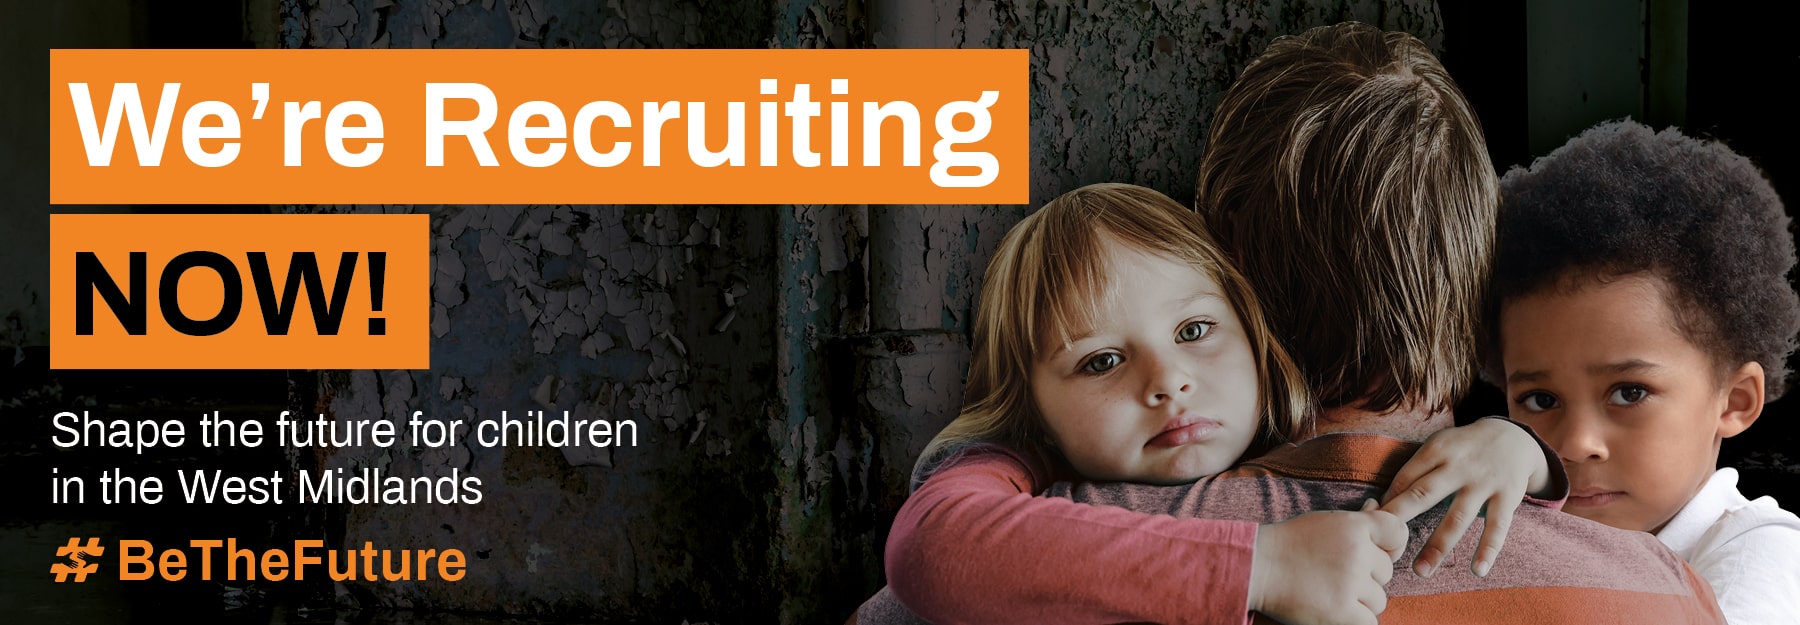 We're recruiting now to qualified social care roles. Help shape the future for children in the west midlands. Give them a tomorrow, join us today - campaign banner